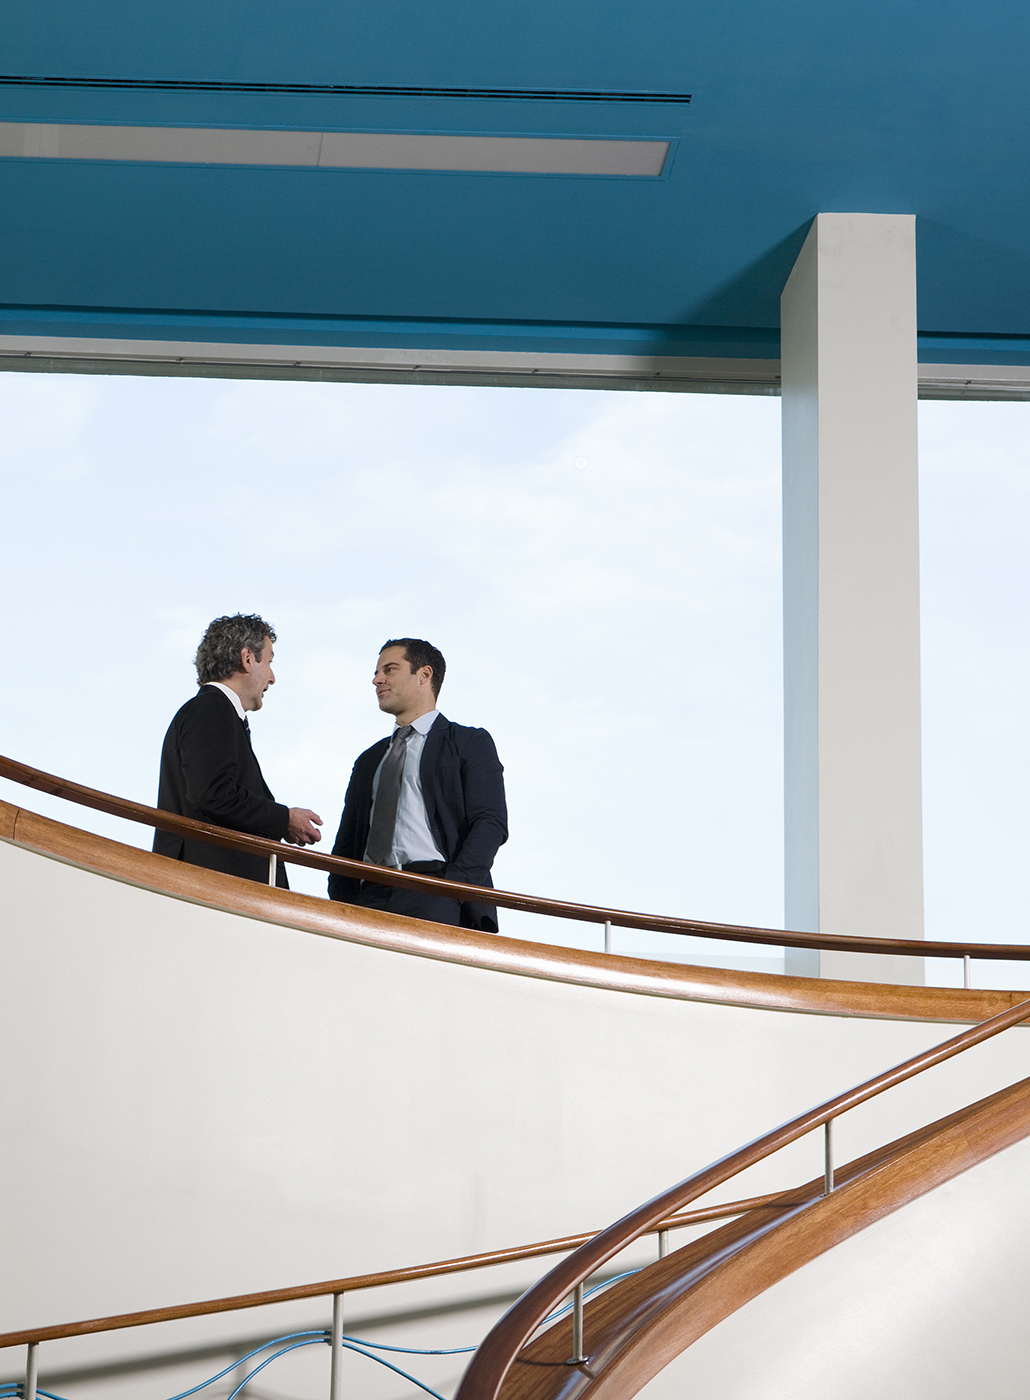 Two businessmen converse on a balcony.